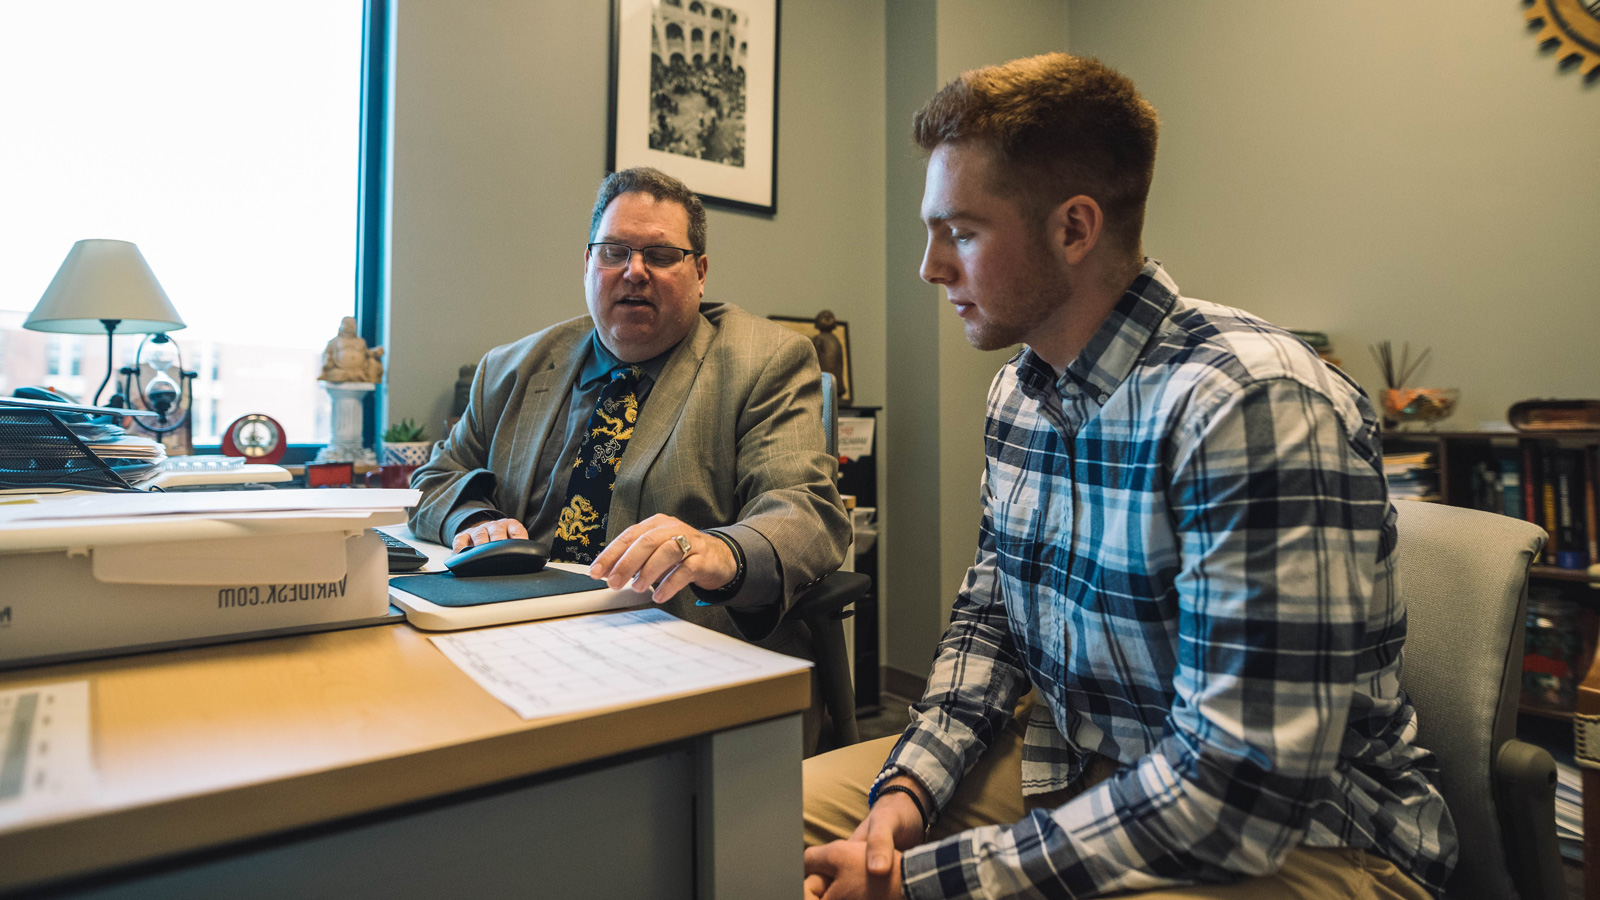 business administration professor meets with student